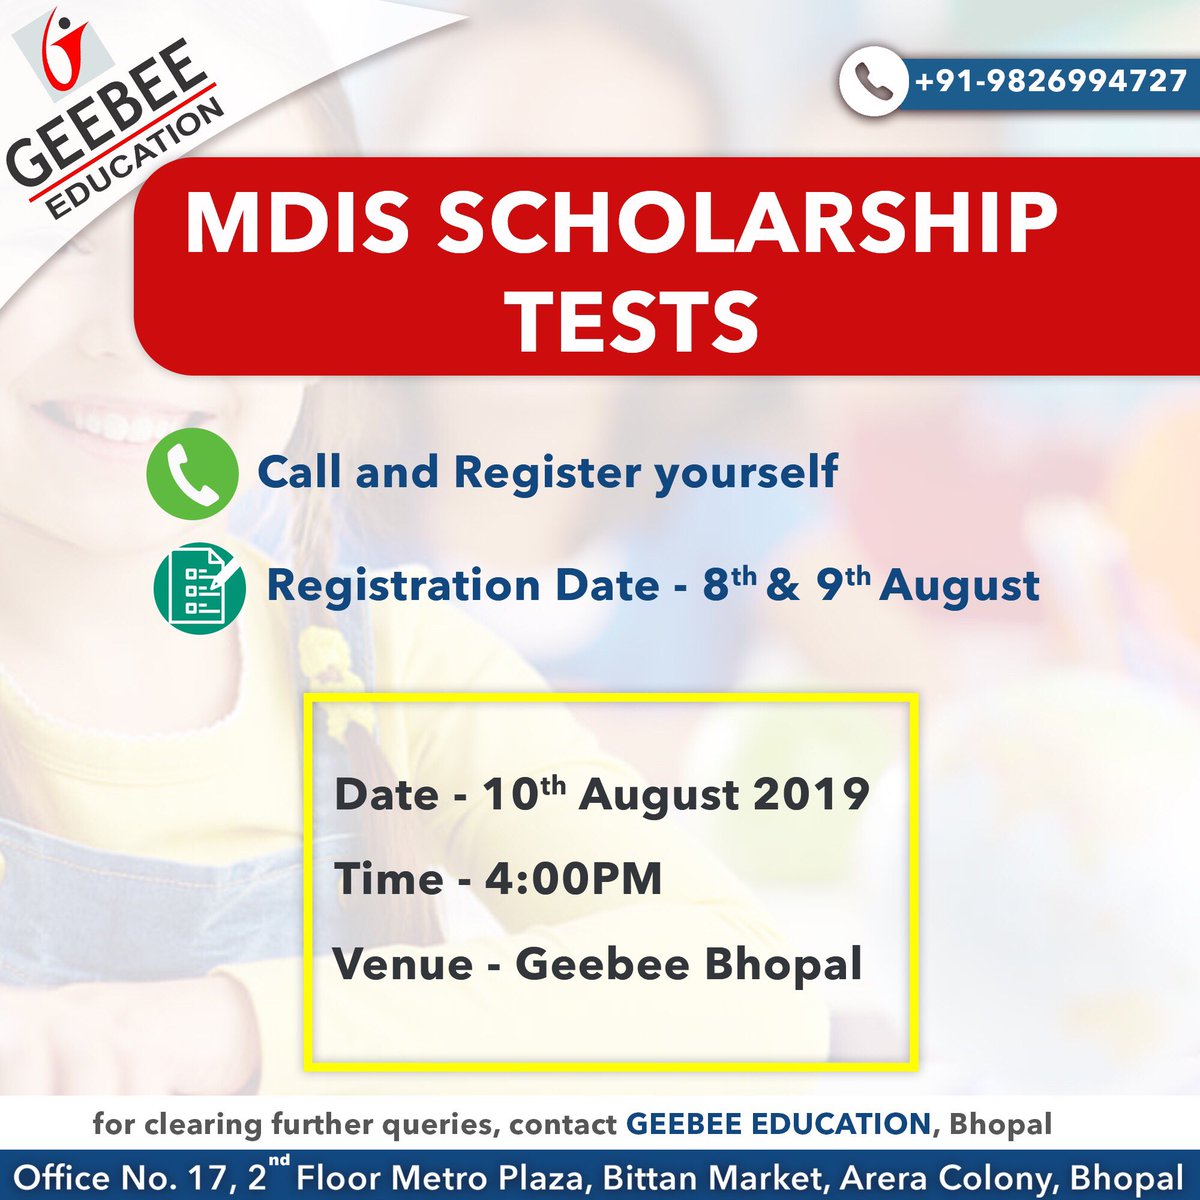 |🇸🇬MDIS #Scholarship Test this SATURDAY|
.
Hurry up for REGISTRATION
#mdis #mdissingapore #singapore #bhopalevents #events
.
#besttrainingbhopal  #GEEBEE_Bhopal #GEEBEE #visaassistance #visadoubts #visafinance #bhopal #consultant  #bestconsultant #bestbhopalconsultancy